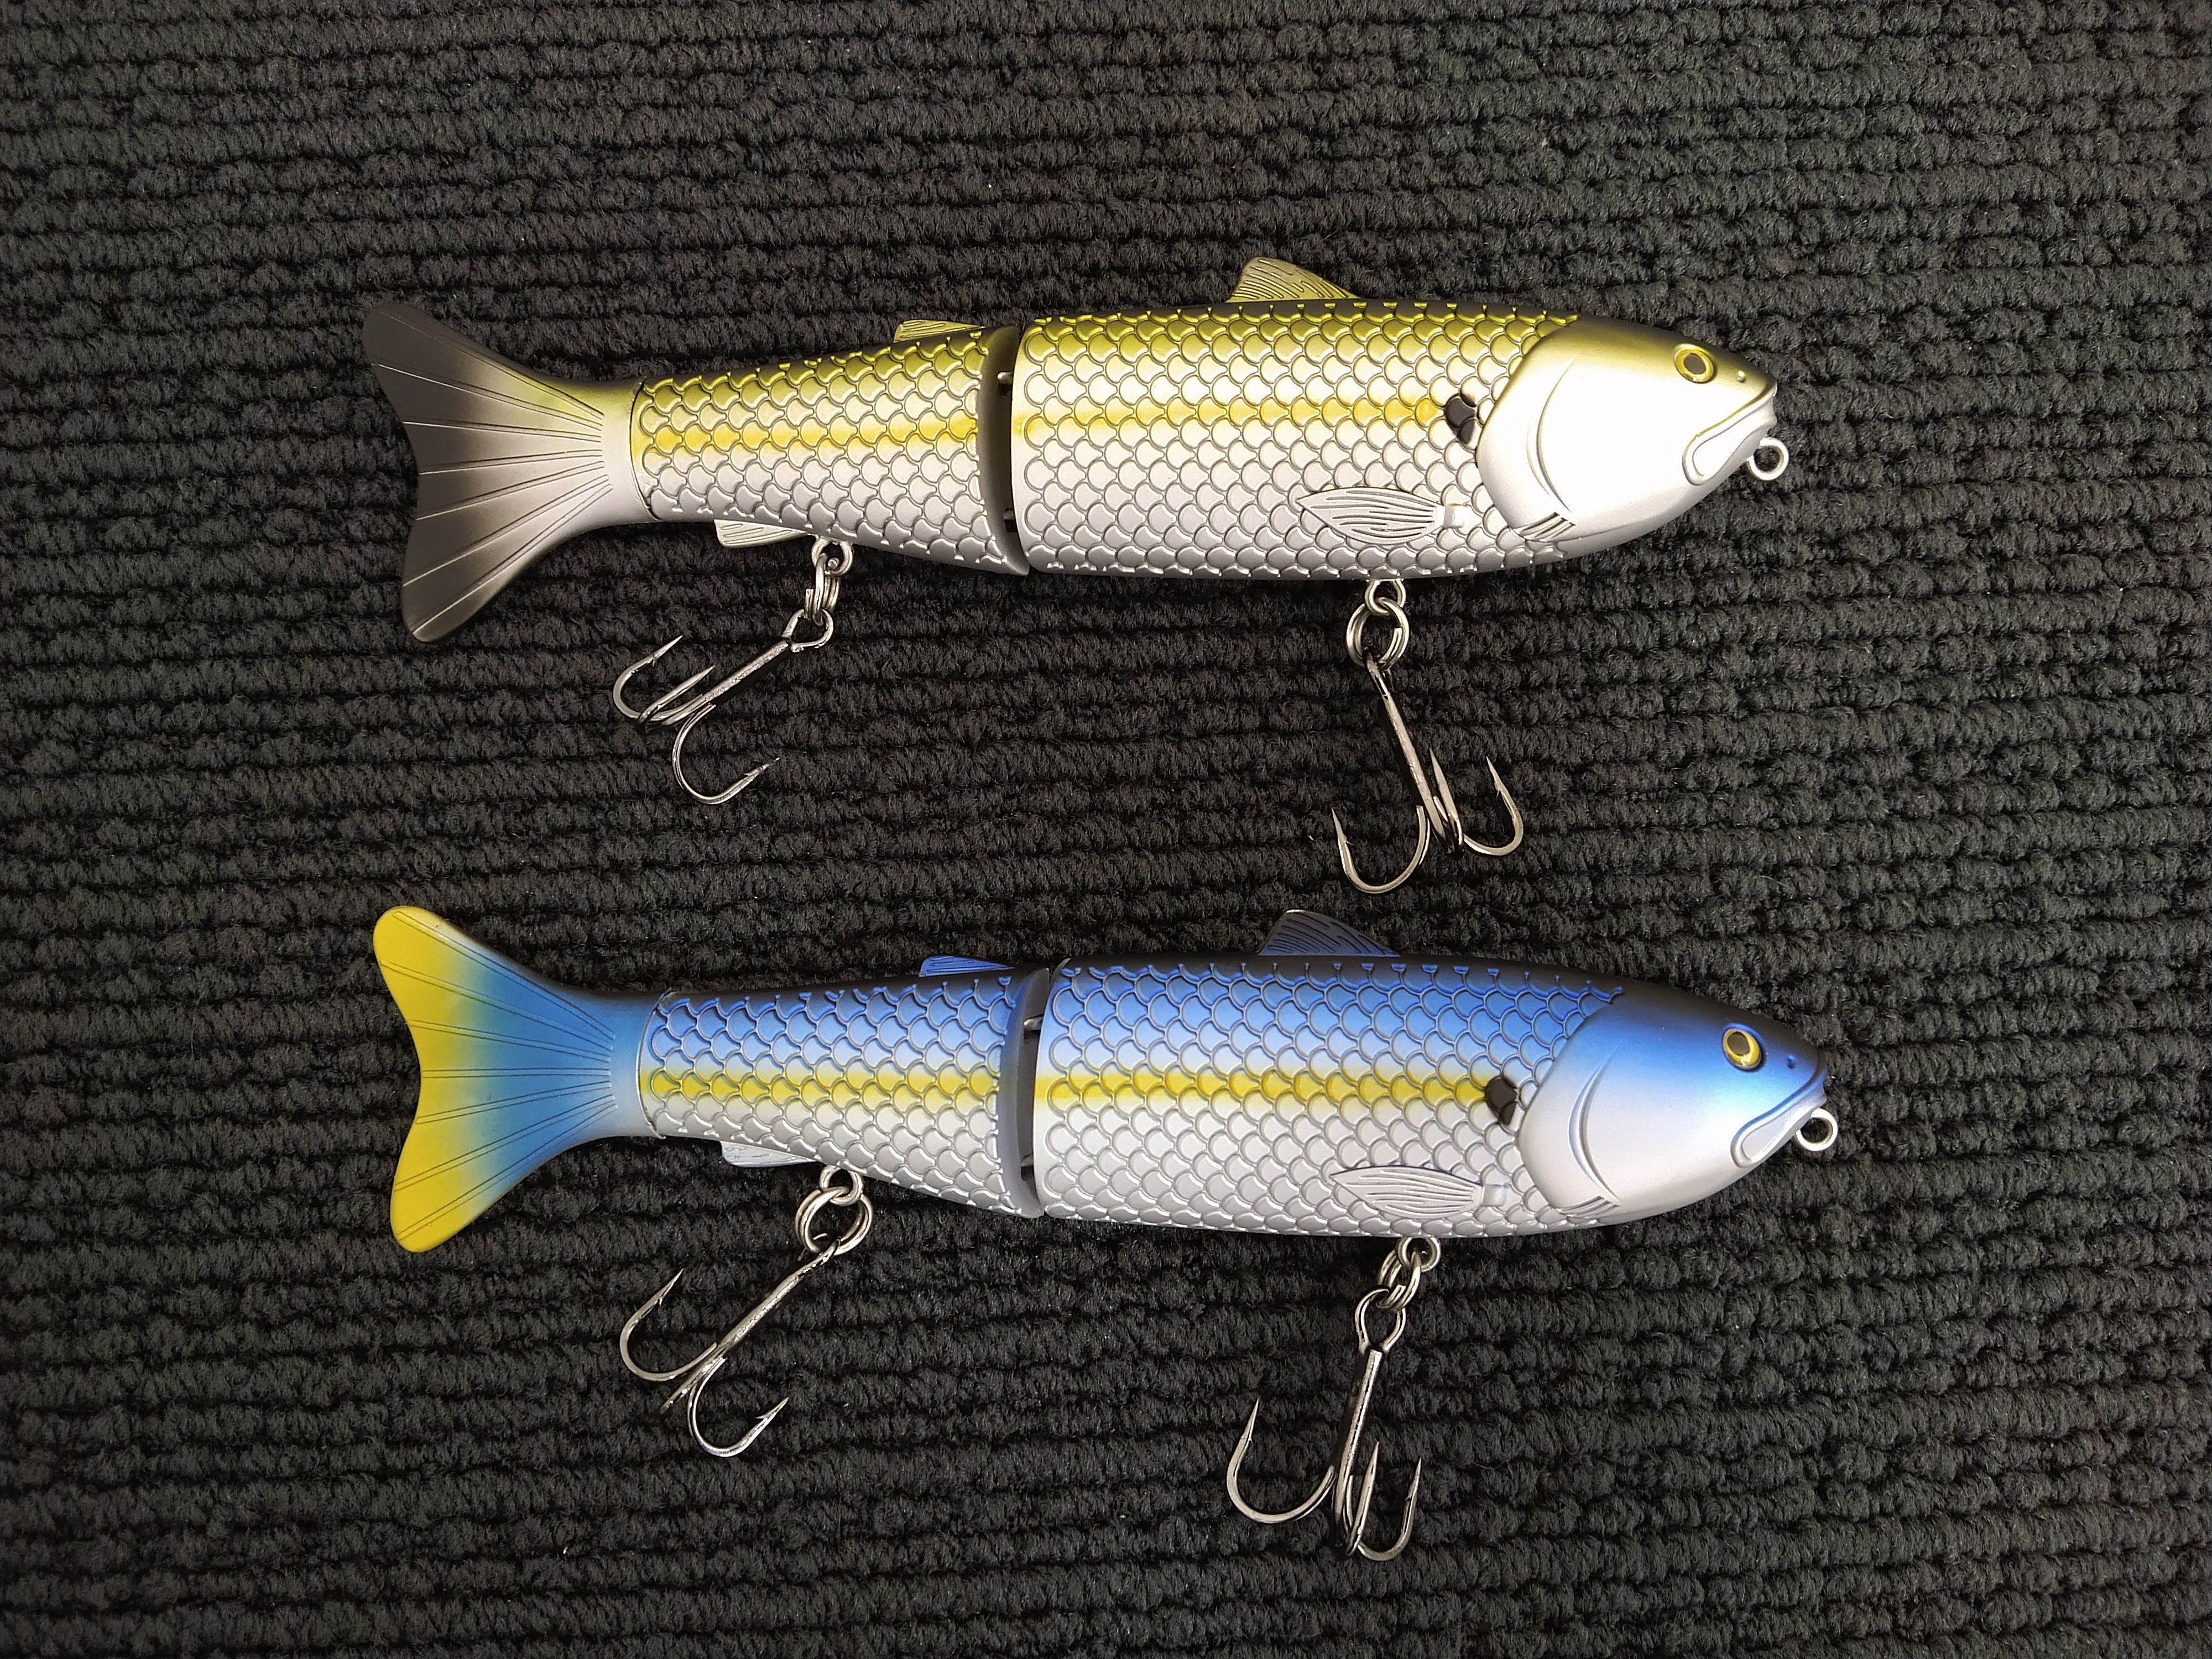 Swim bait belly weighted hooks - Fishing Tackle - Bass Fishing Forums